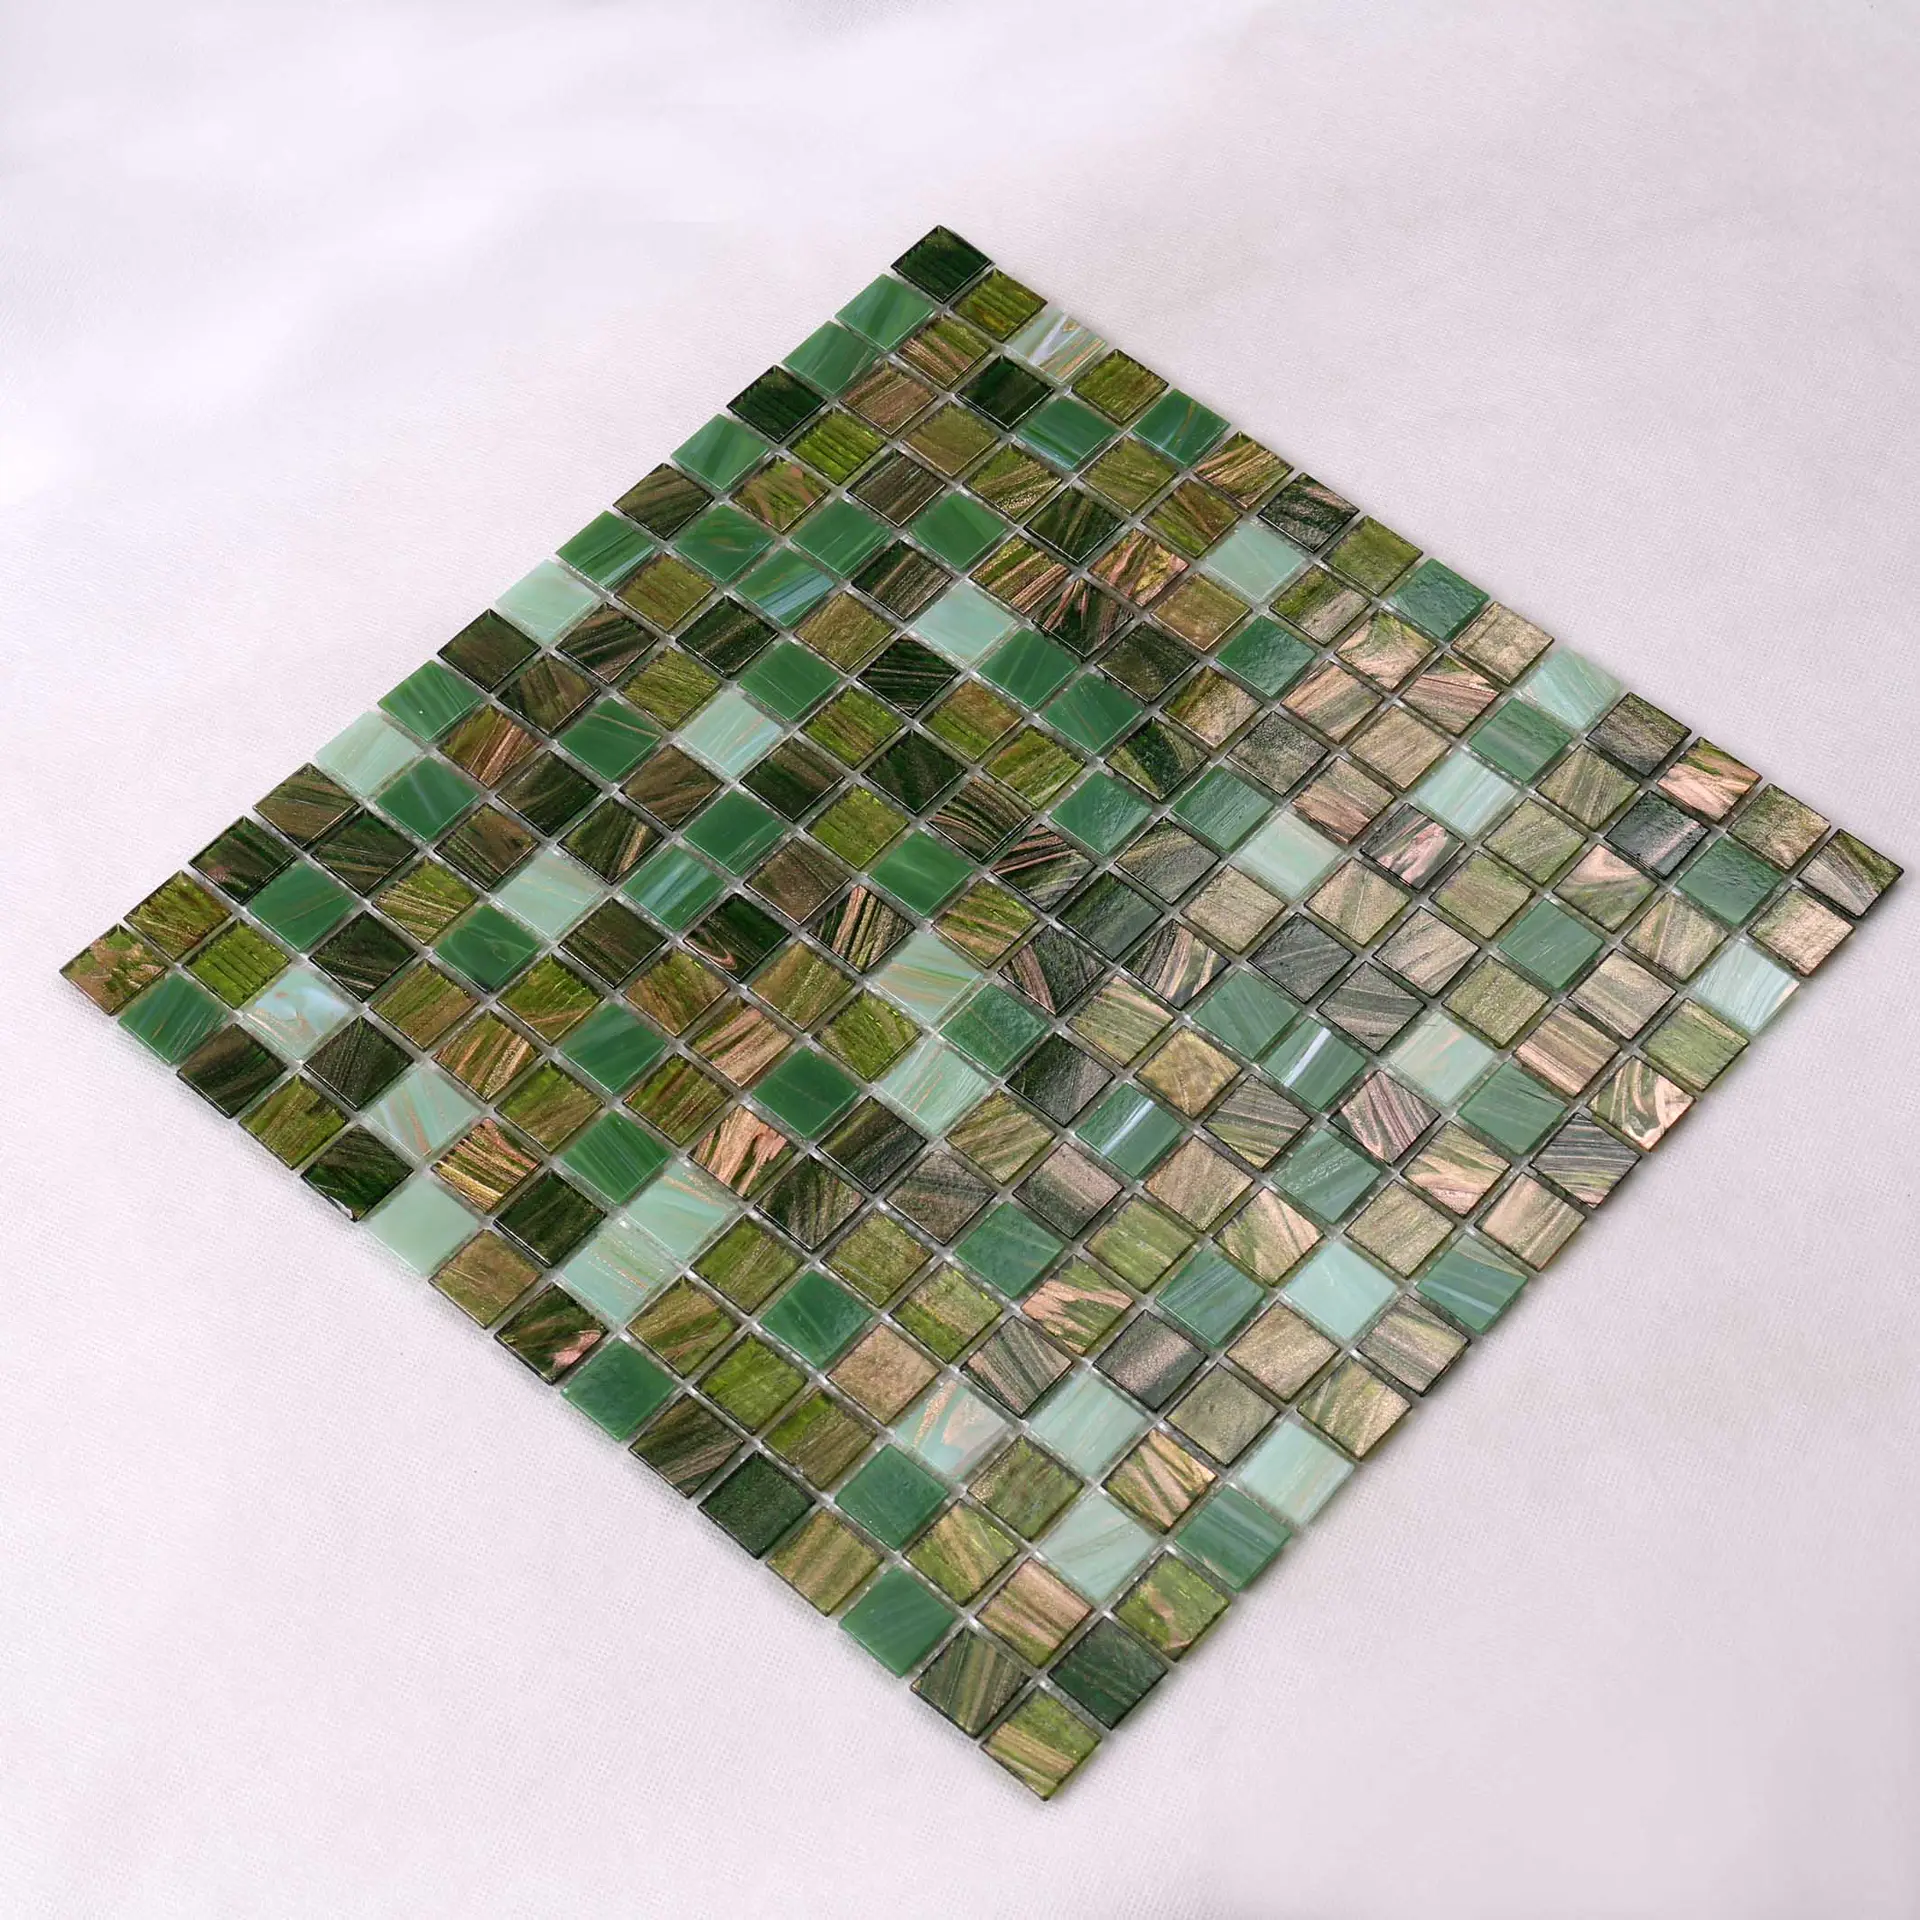 luxury mosaic tiles online deck for business for bathroom